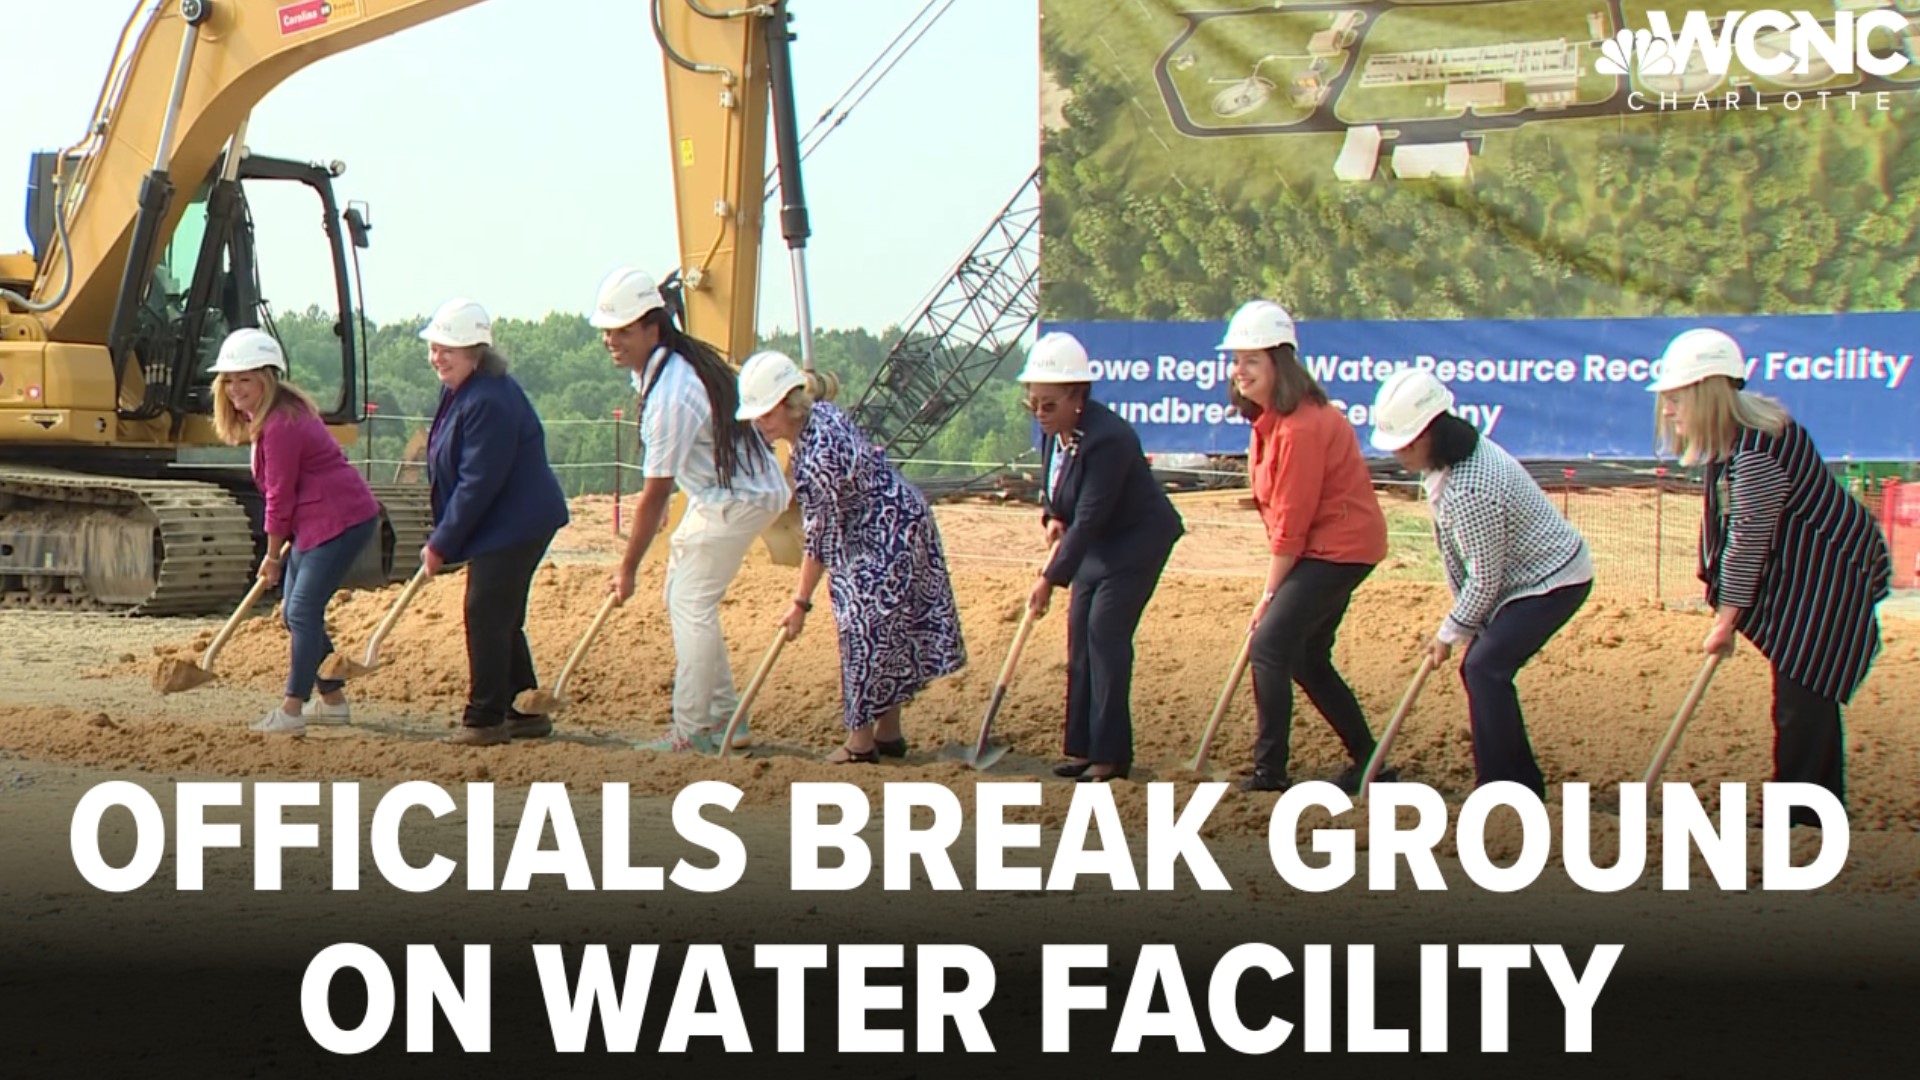 The Stowe Regional Water Resource Recovery Facility will treat up to 25 million gallons of water today and serve Charlotte, Belmont and Mount Holly residents.